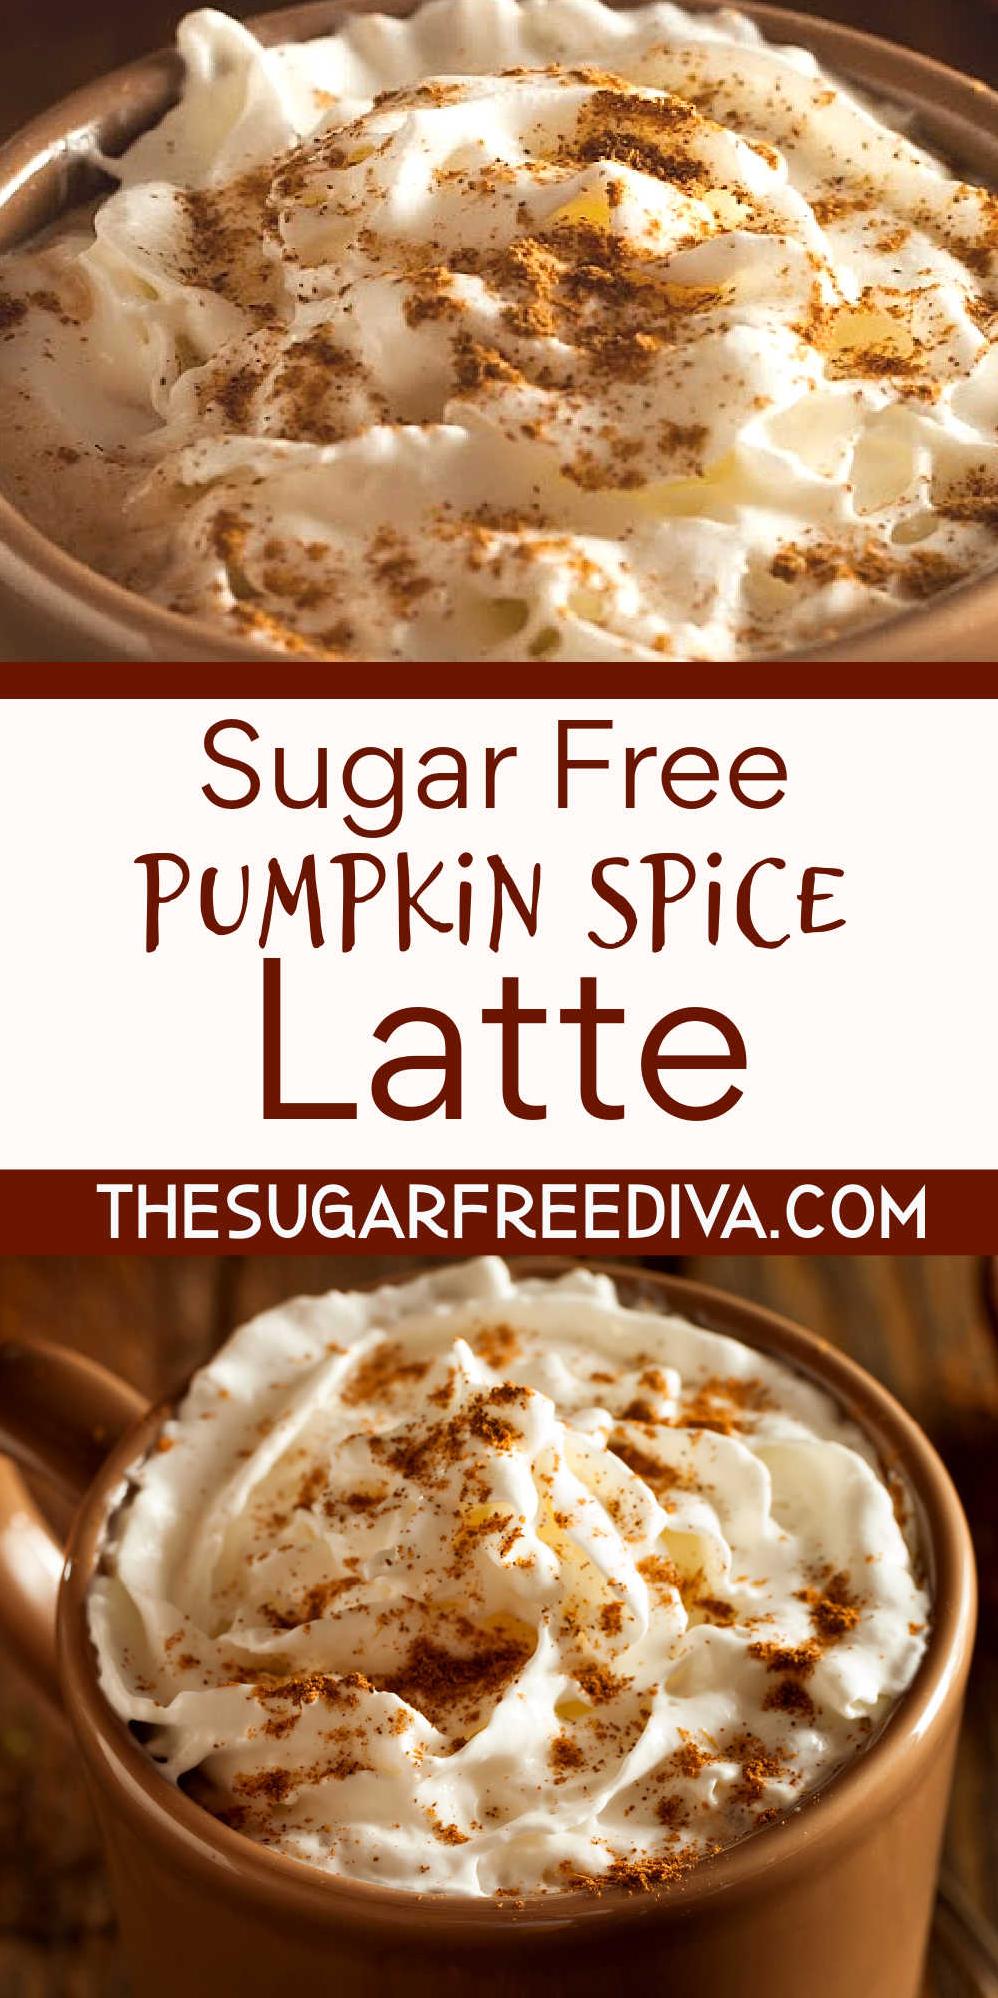  No added sugar means you can indulge in all the pumpkin spice flavors without the guilt.